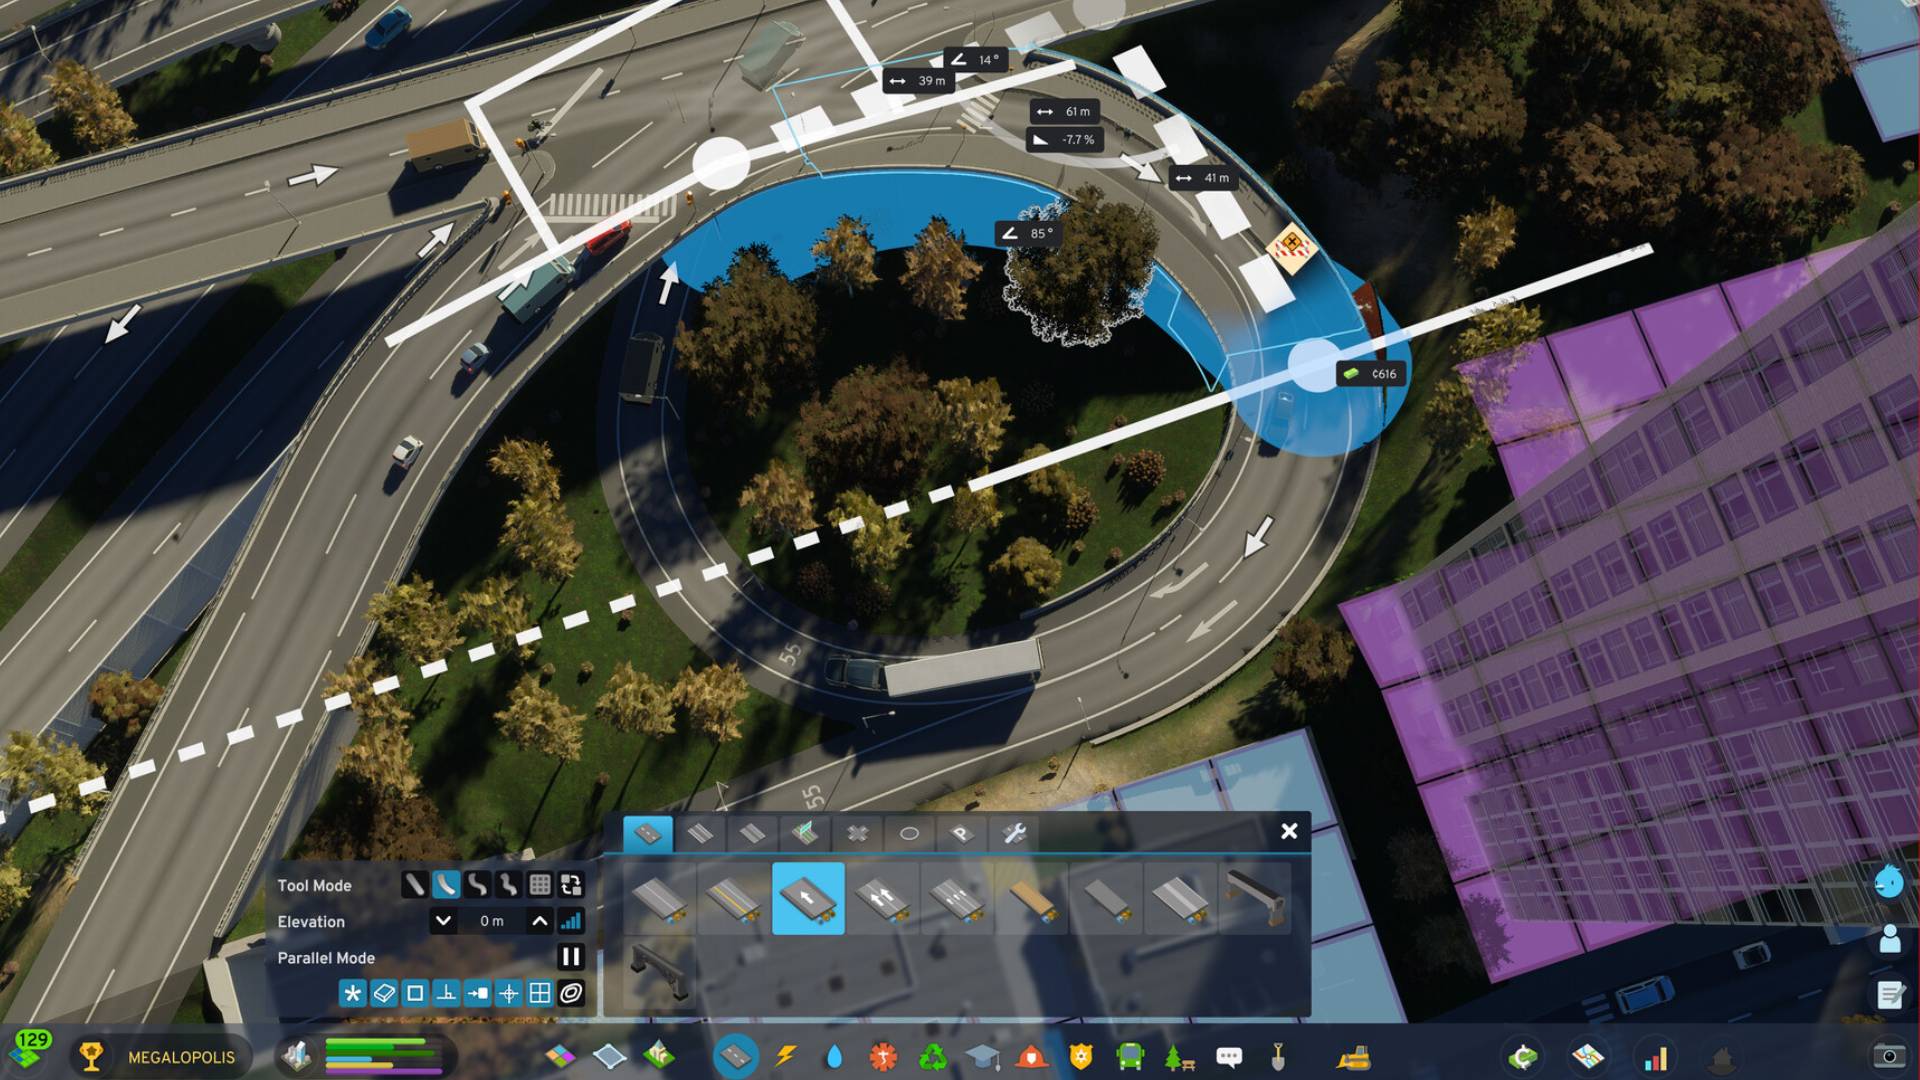 Test Cities: Skylines 2 on your PC within Steam's refund window